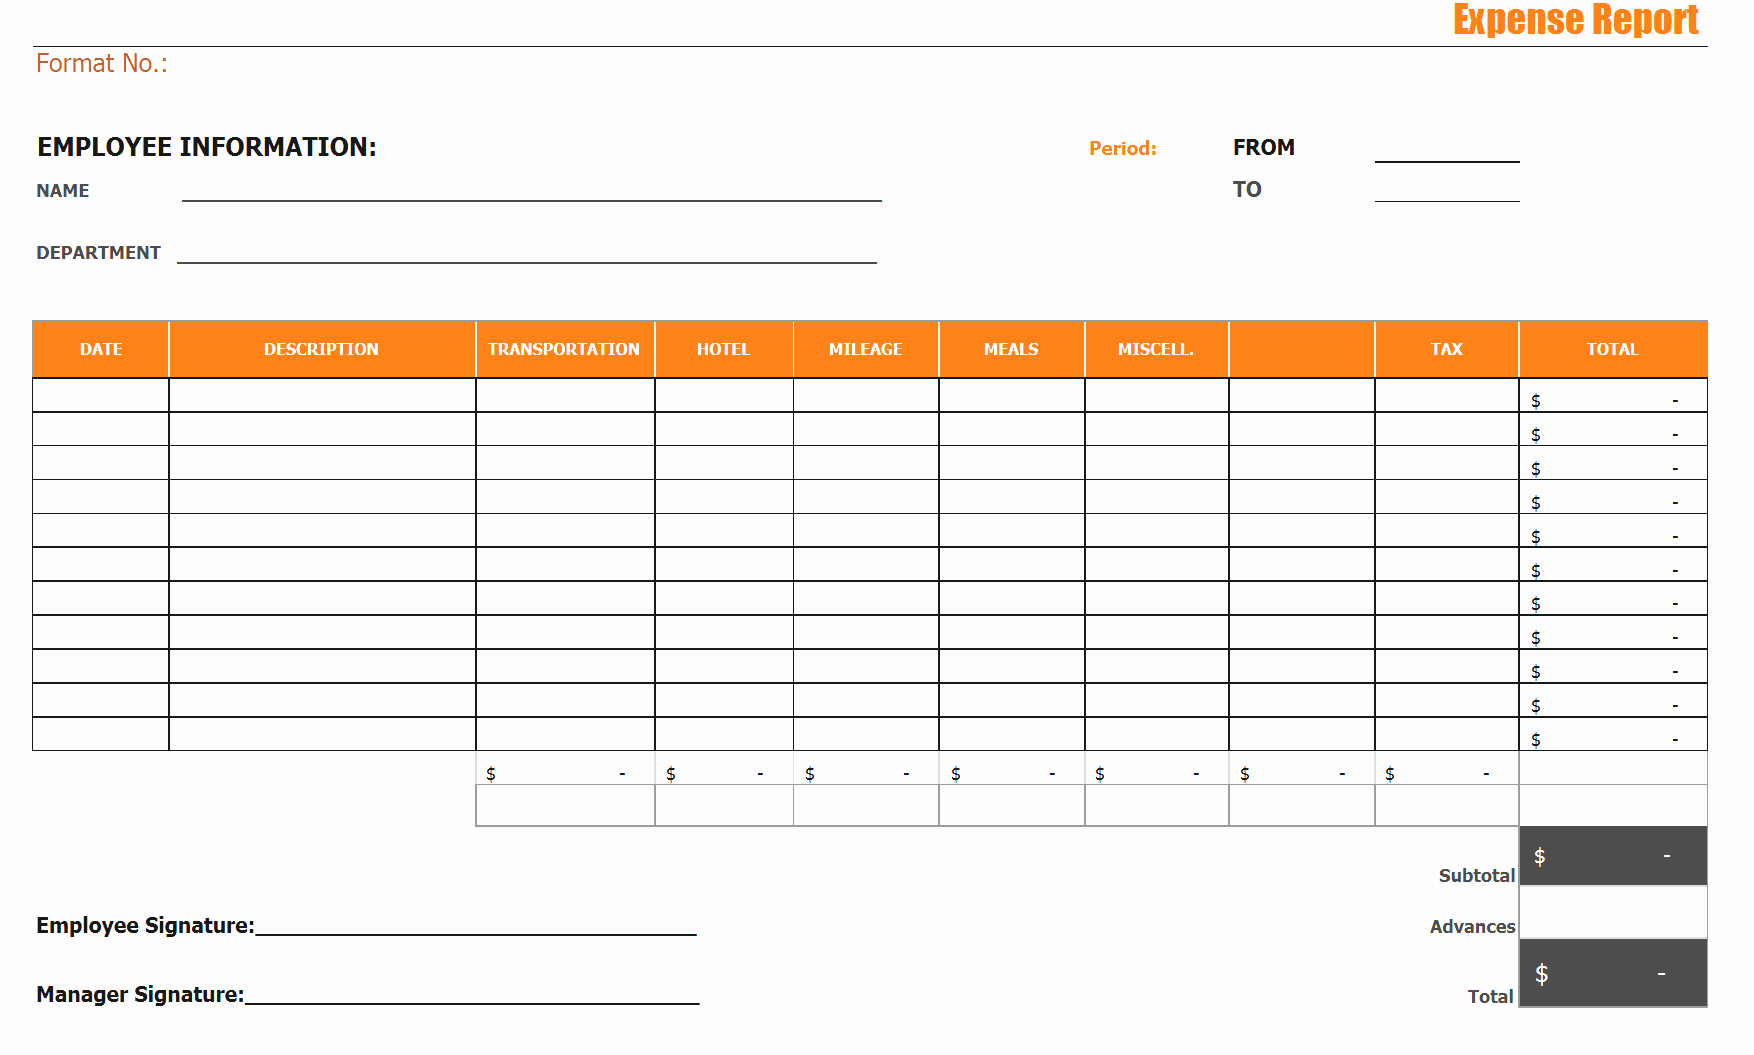 Expenses Sheet Template Free New Blank Expense Report Mughals